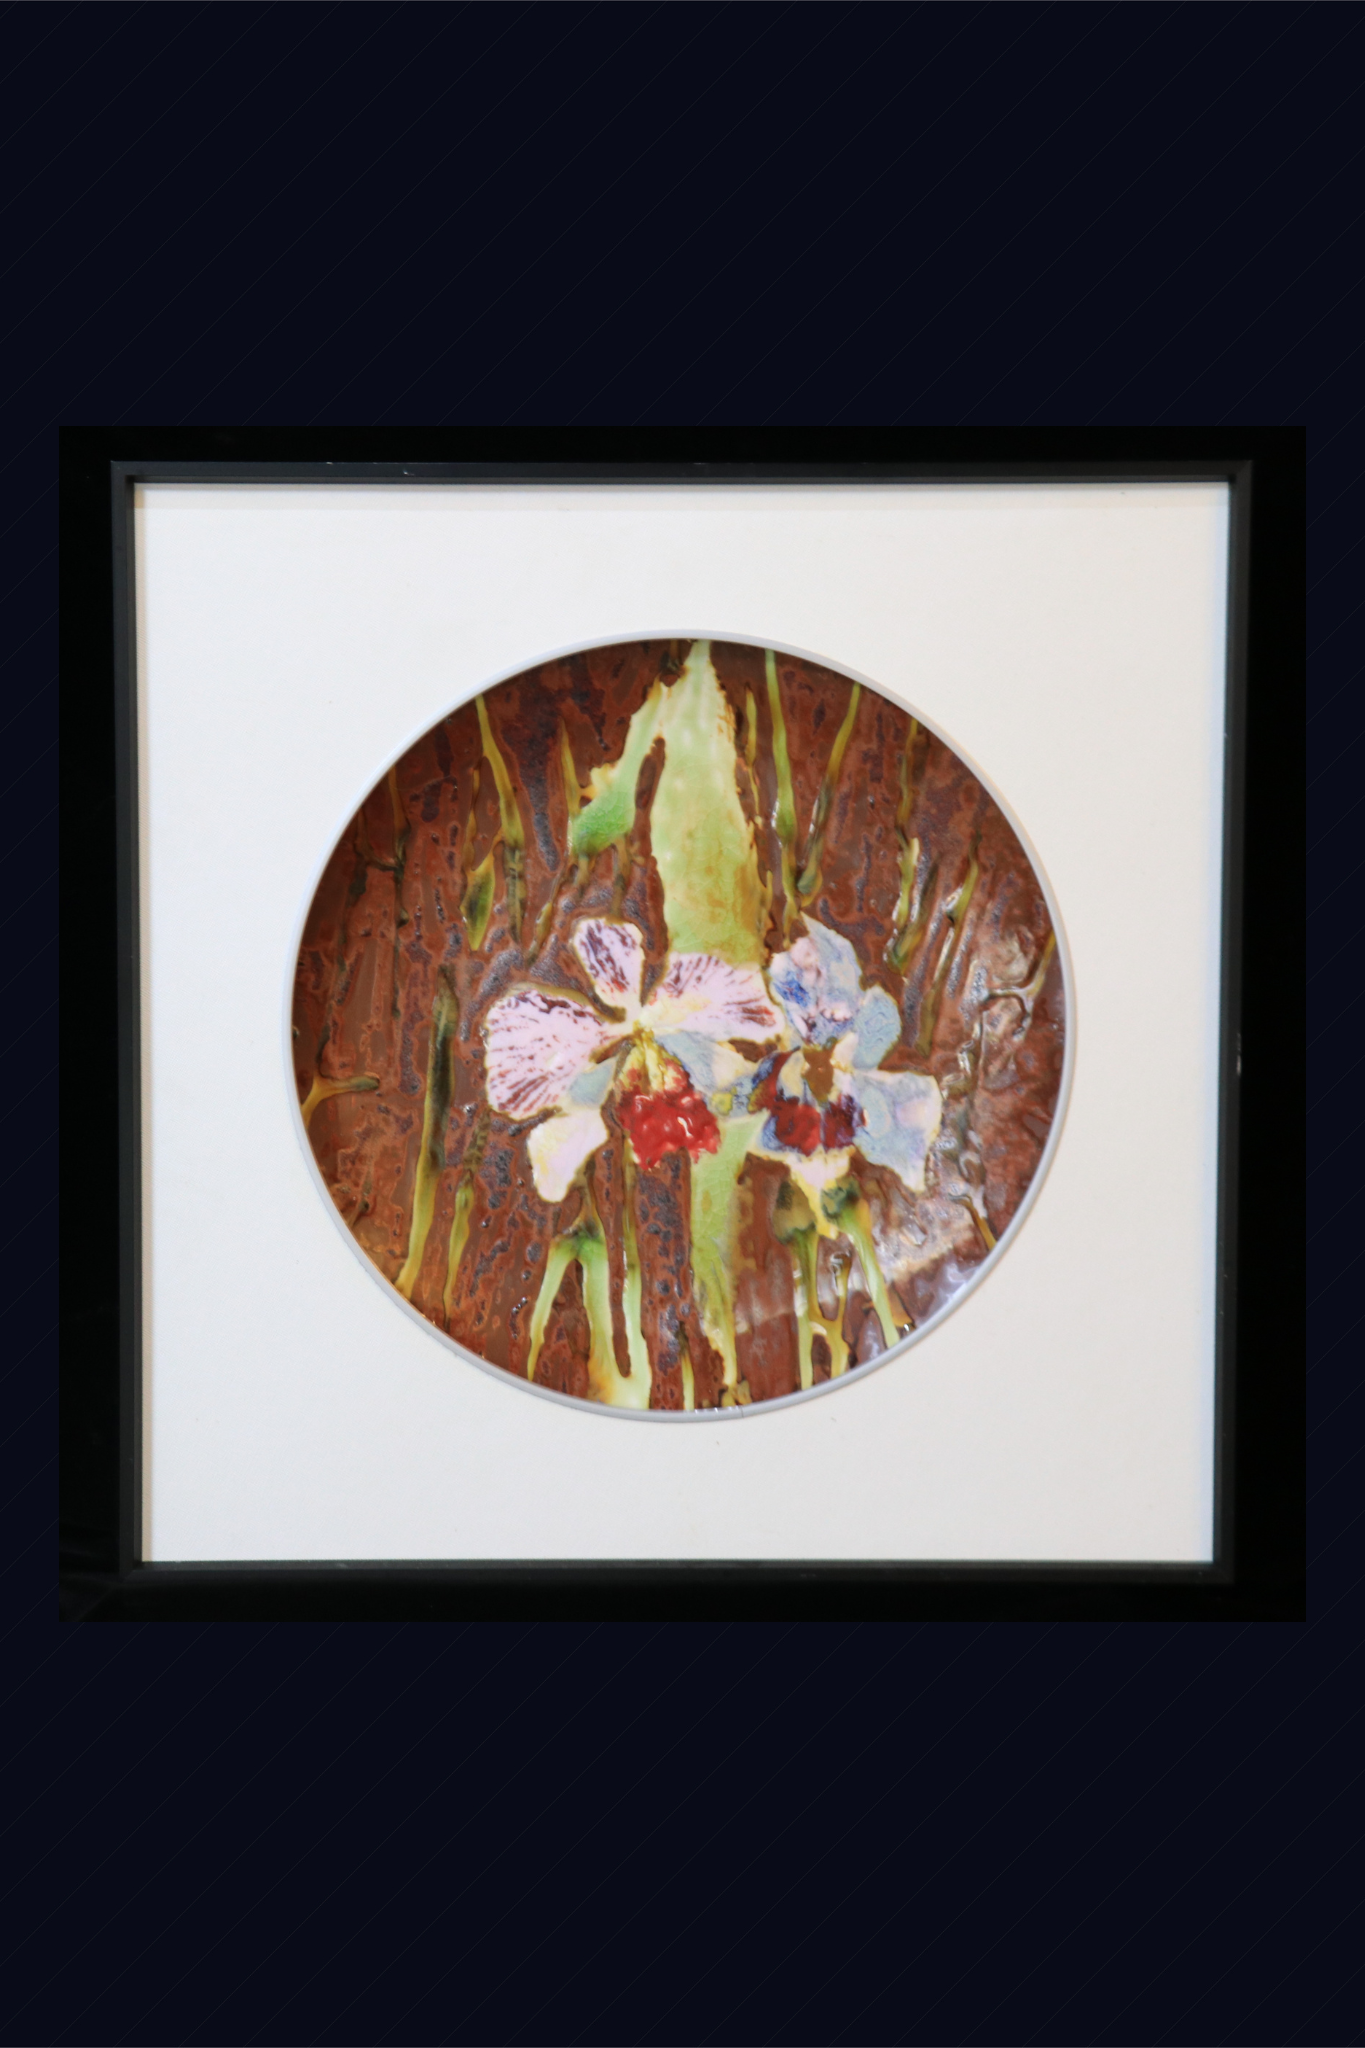 Porcelain Plate, Hand-Painted Plate, Flowers V, High-Temperature Glaze